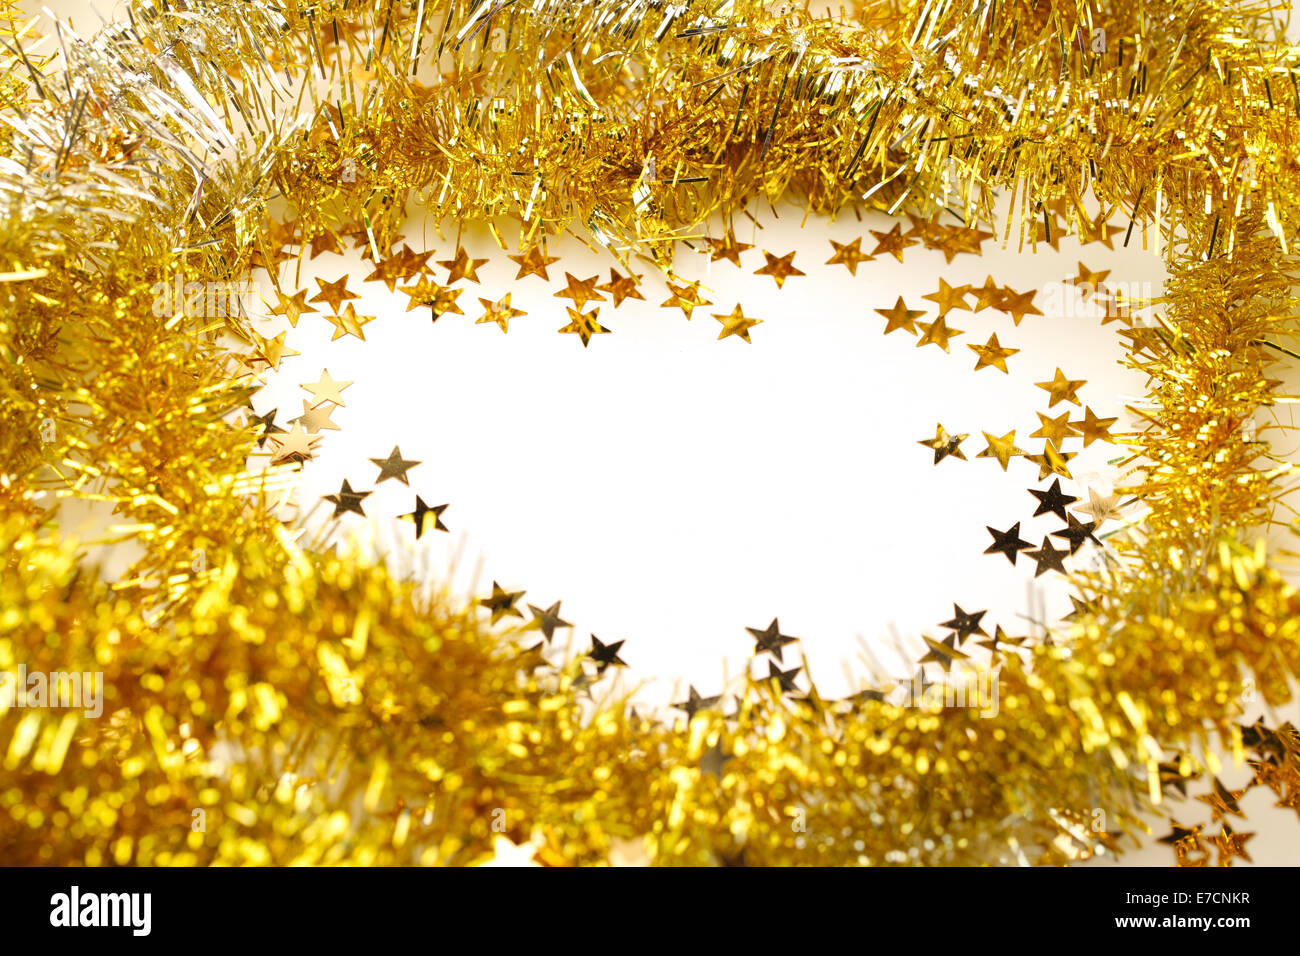 Golden tinsel garland frame and star confetti Stock Photo